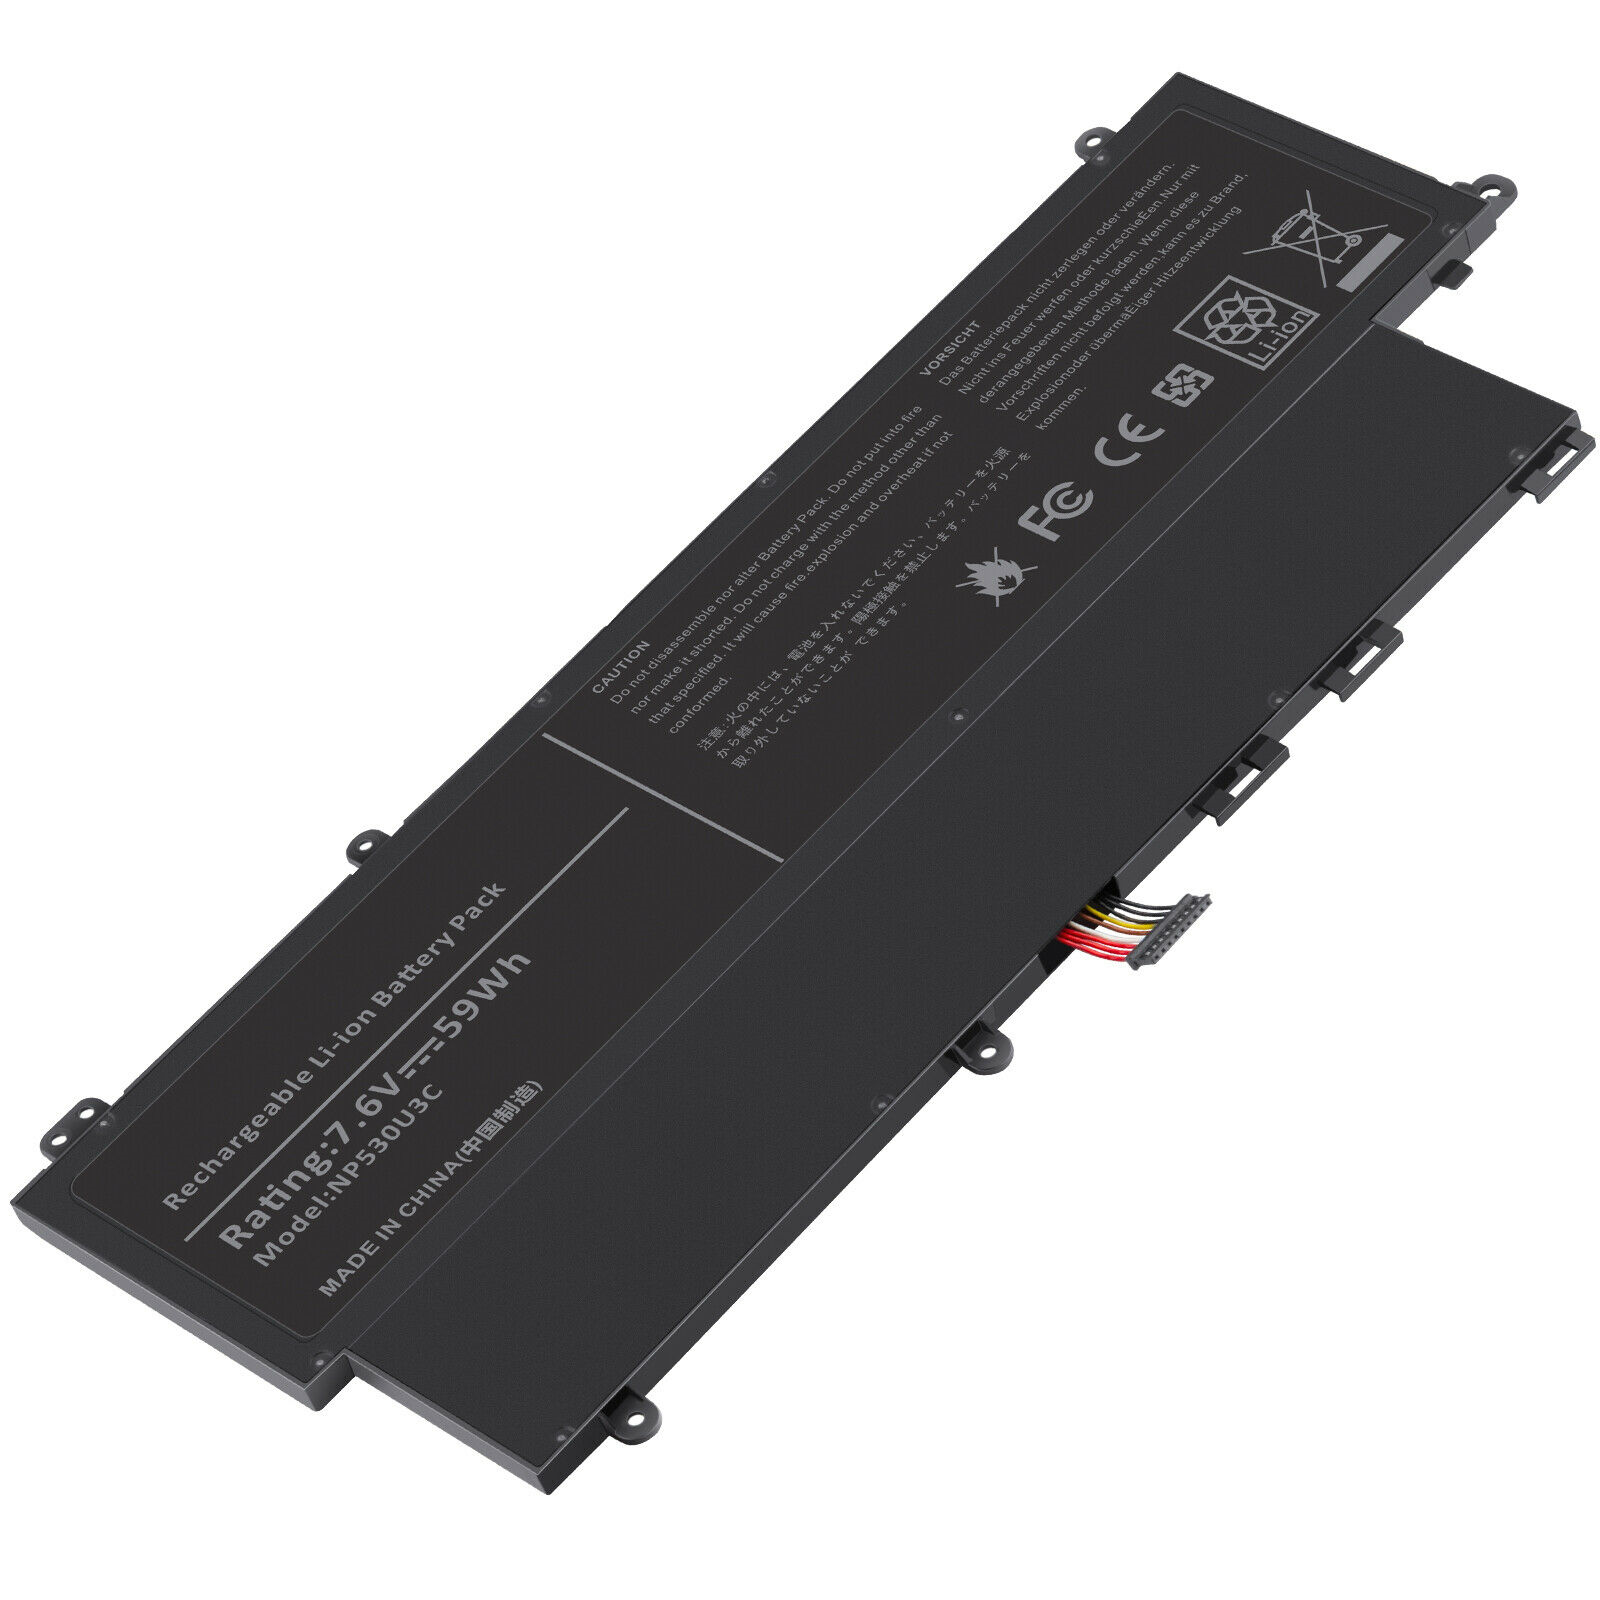 Samsung 532U3C-A04 Replacement Battery